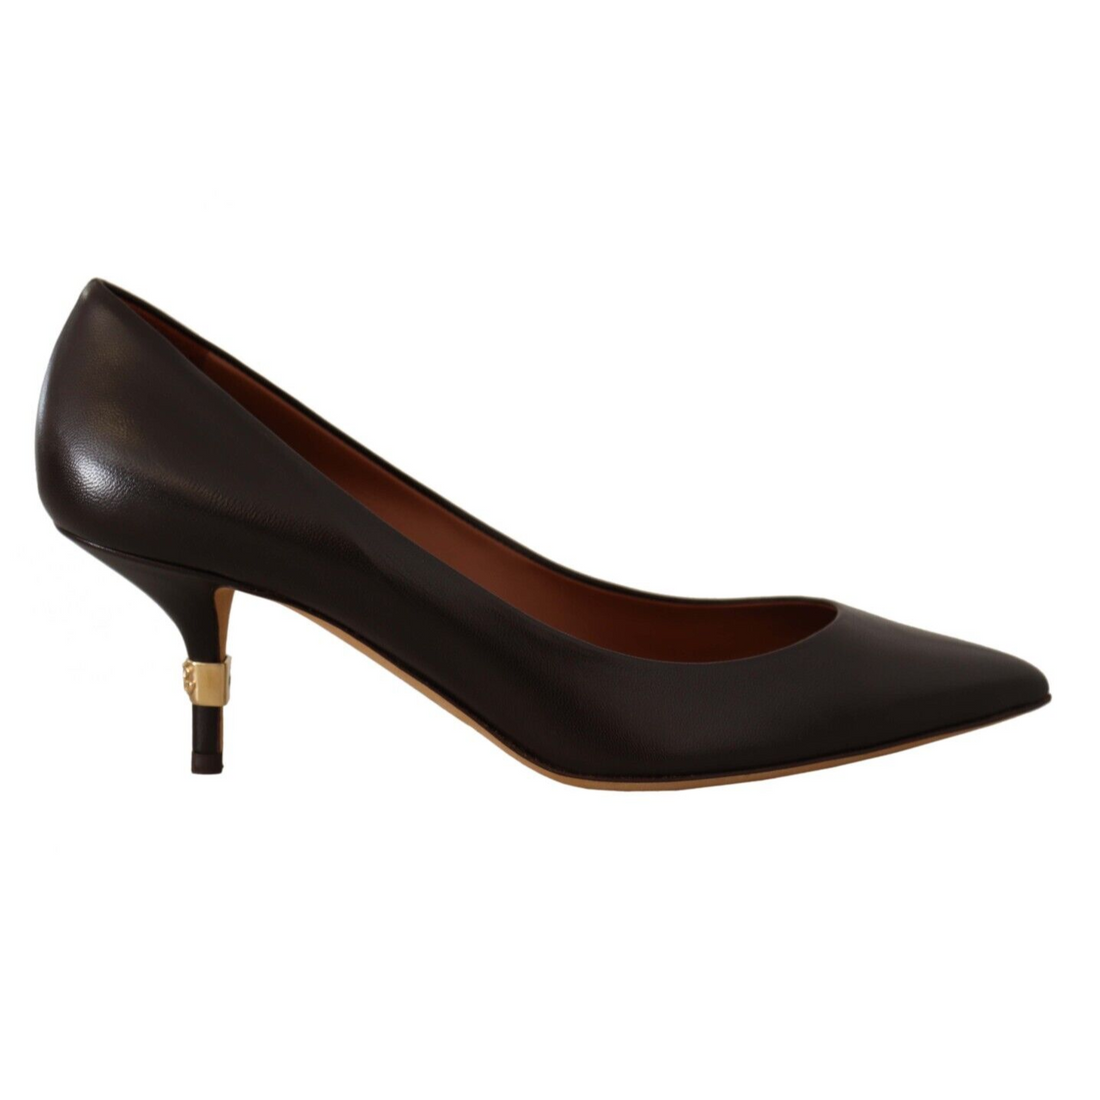 Dolce & Gabbana Brown Leather Kitten Mid Heels Pumps Shoes